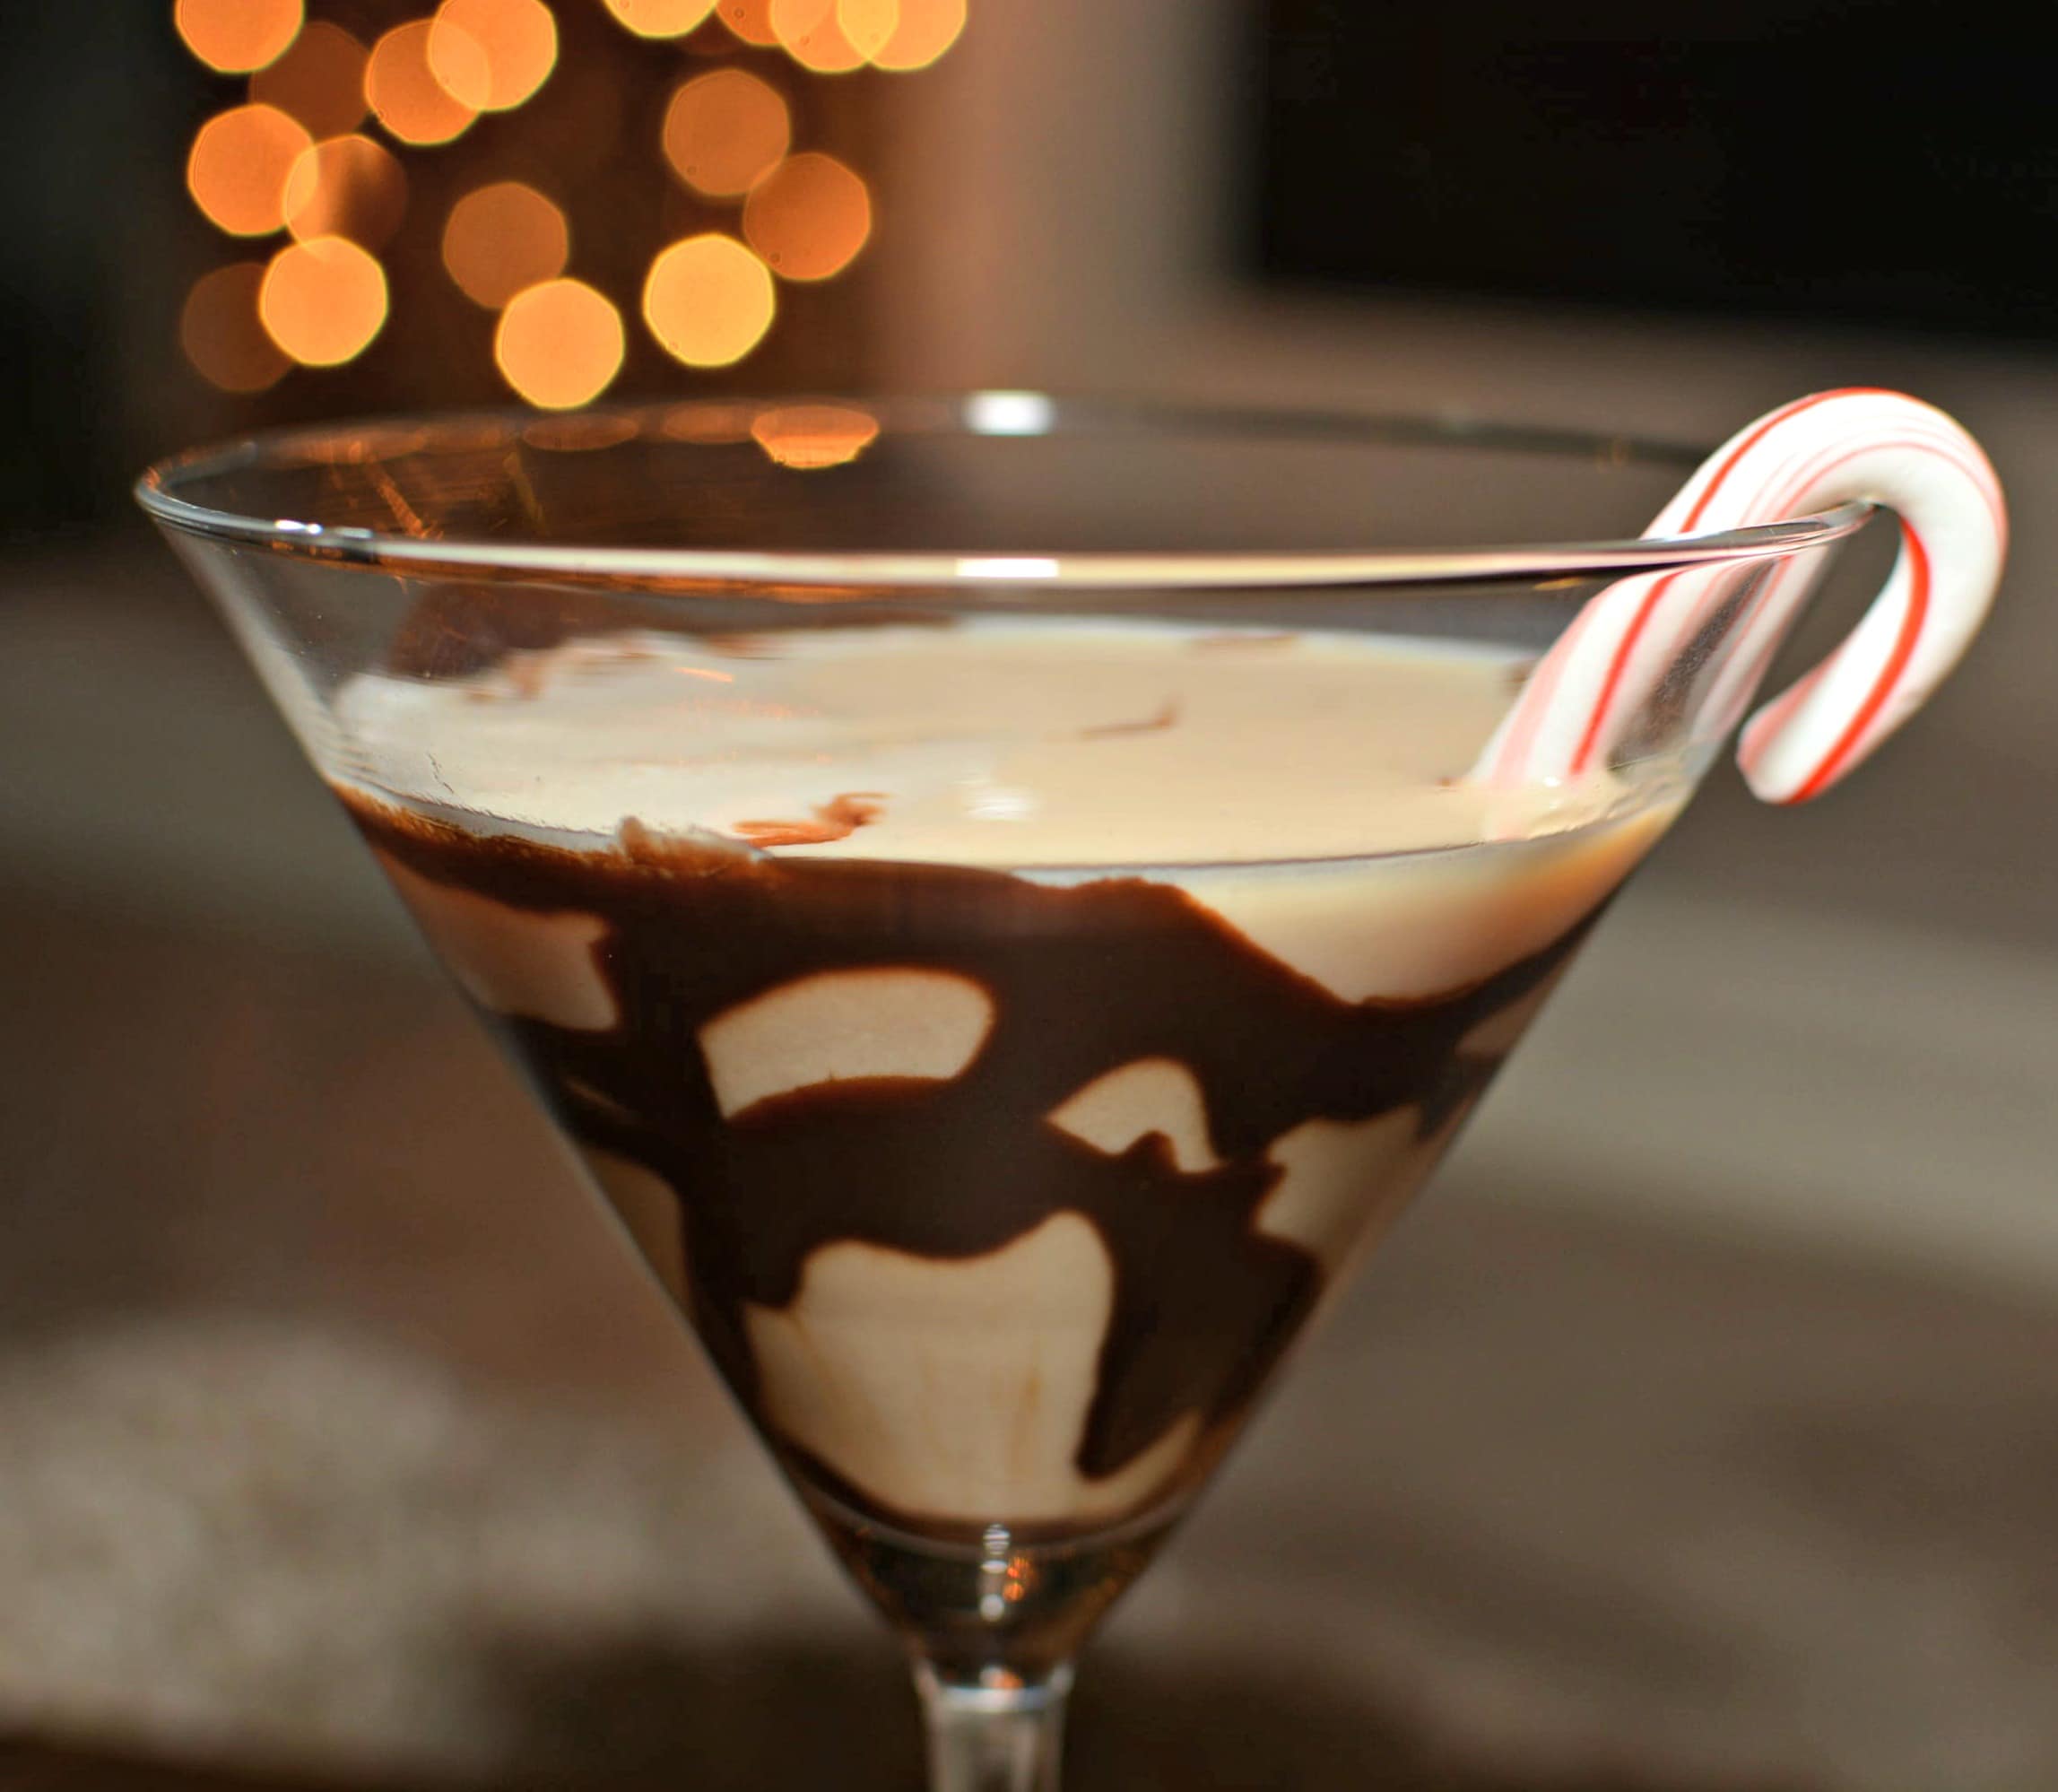 A Bailey's peppermint martini with a candy cane garnish.